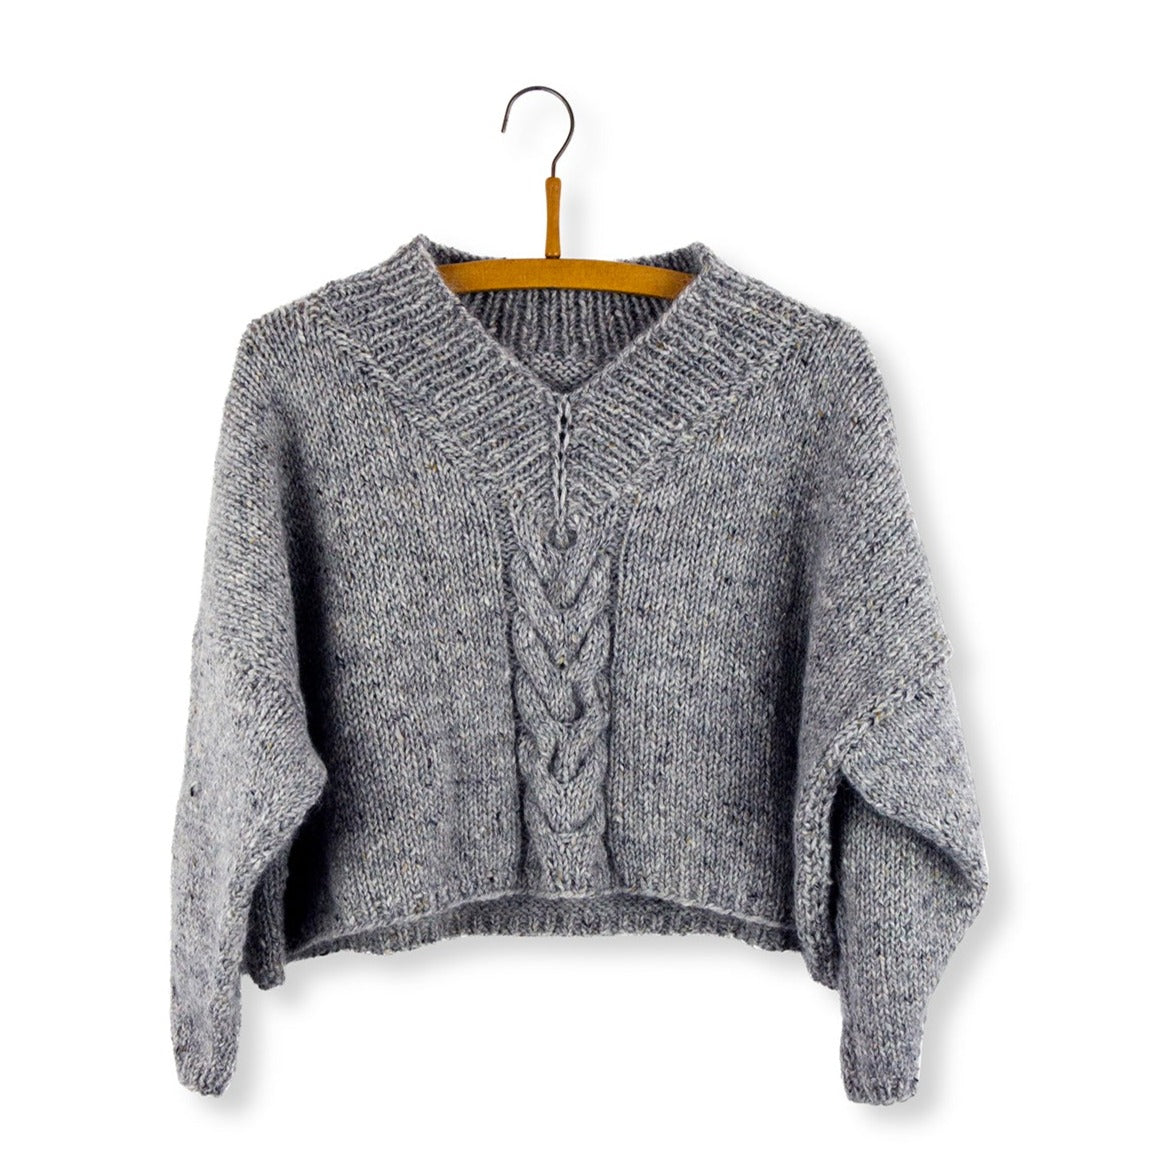 Torhild's Cable Sweater Isager